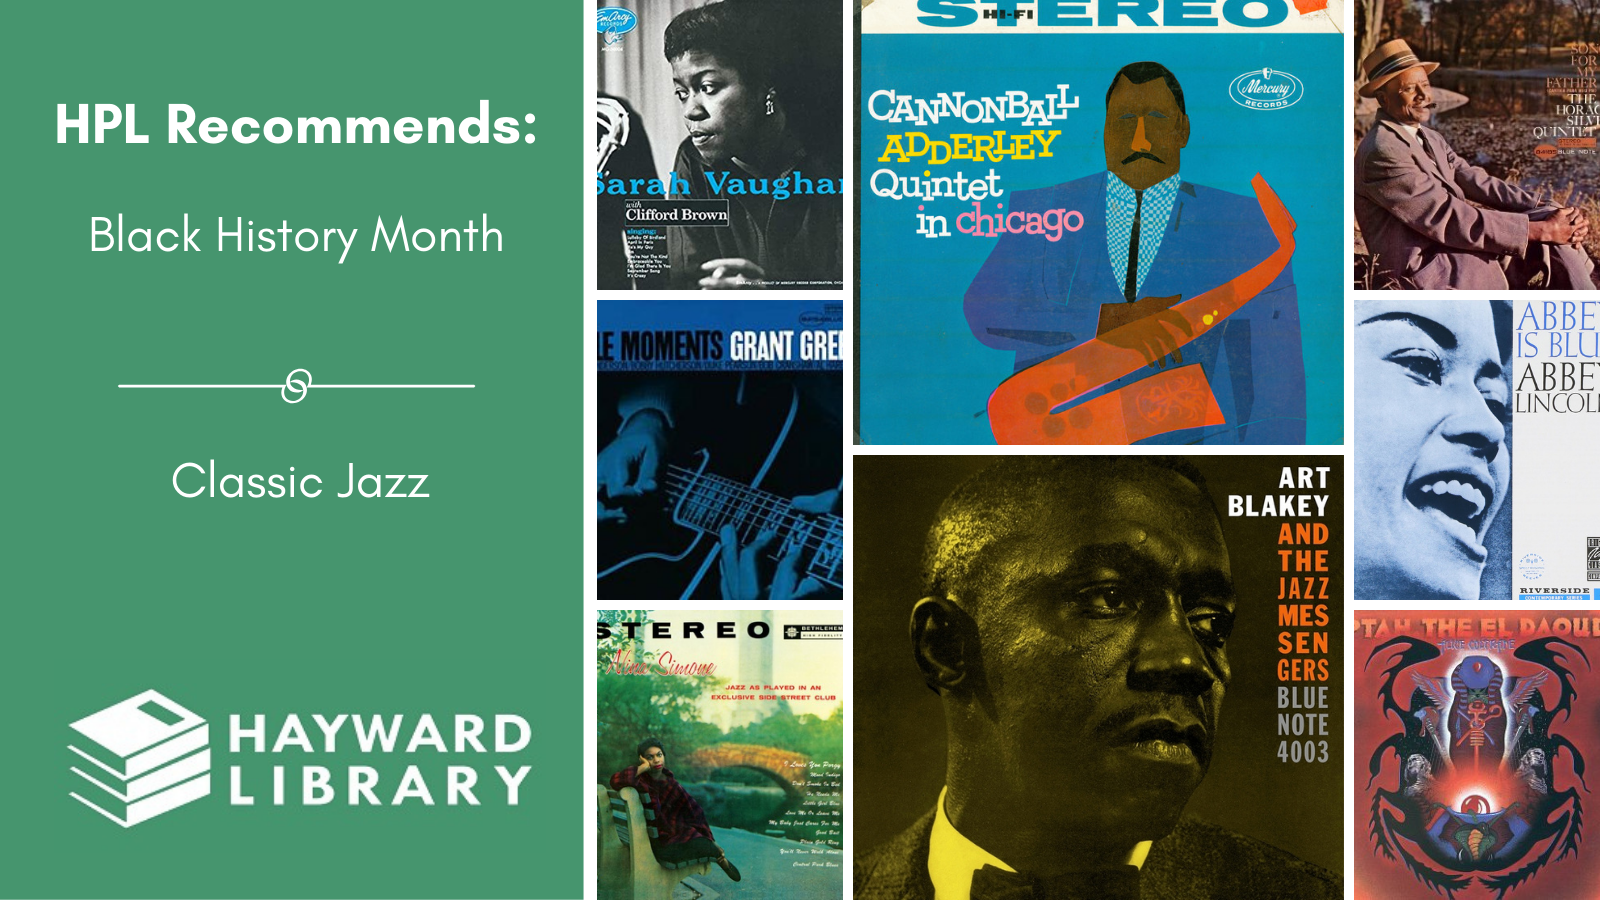 Collage of book covers with a green block on left side that says HPL Recommends, Black History Month, Classic Jazz in white text, with Hayward Library logo below it.